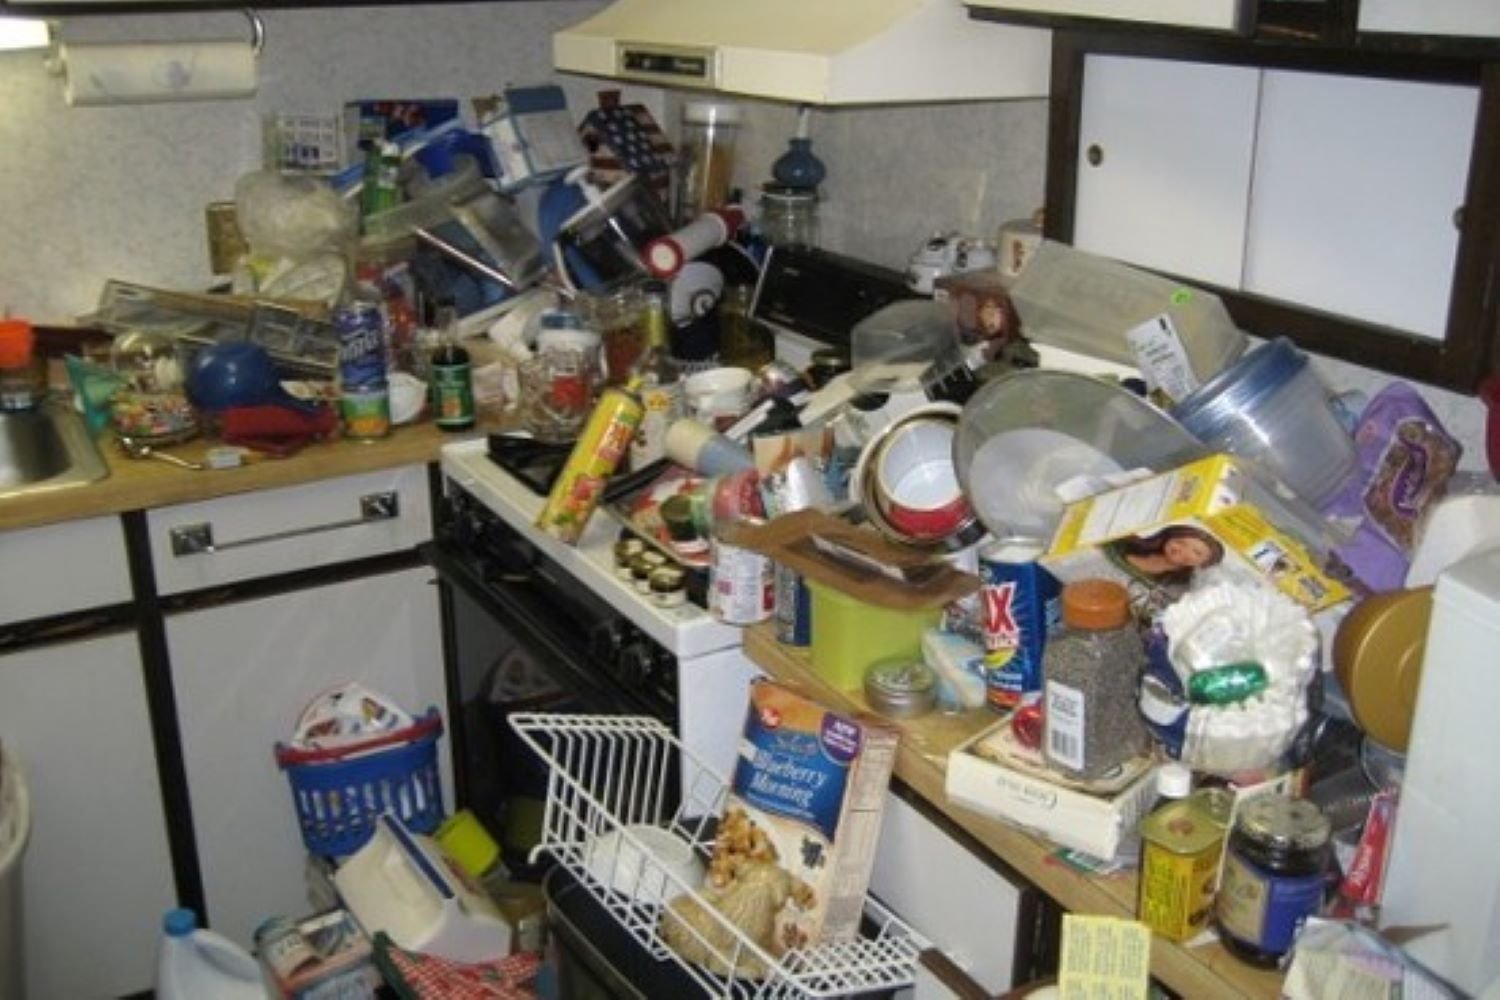 kitchen surfaces covered in junk and rubbish